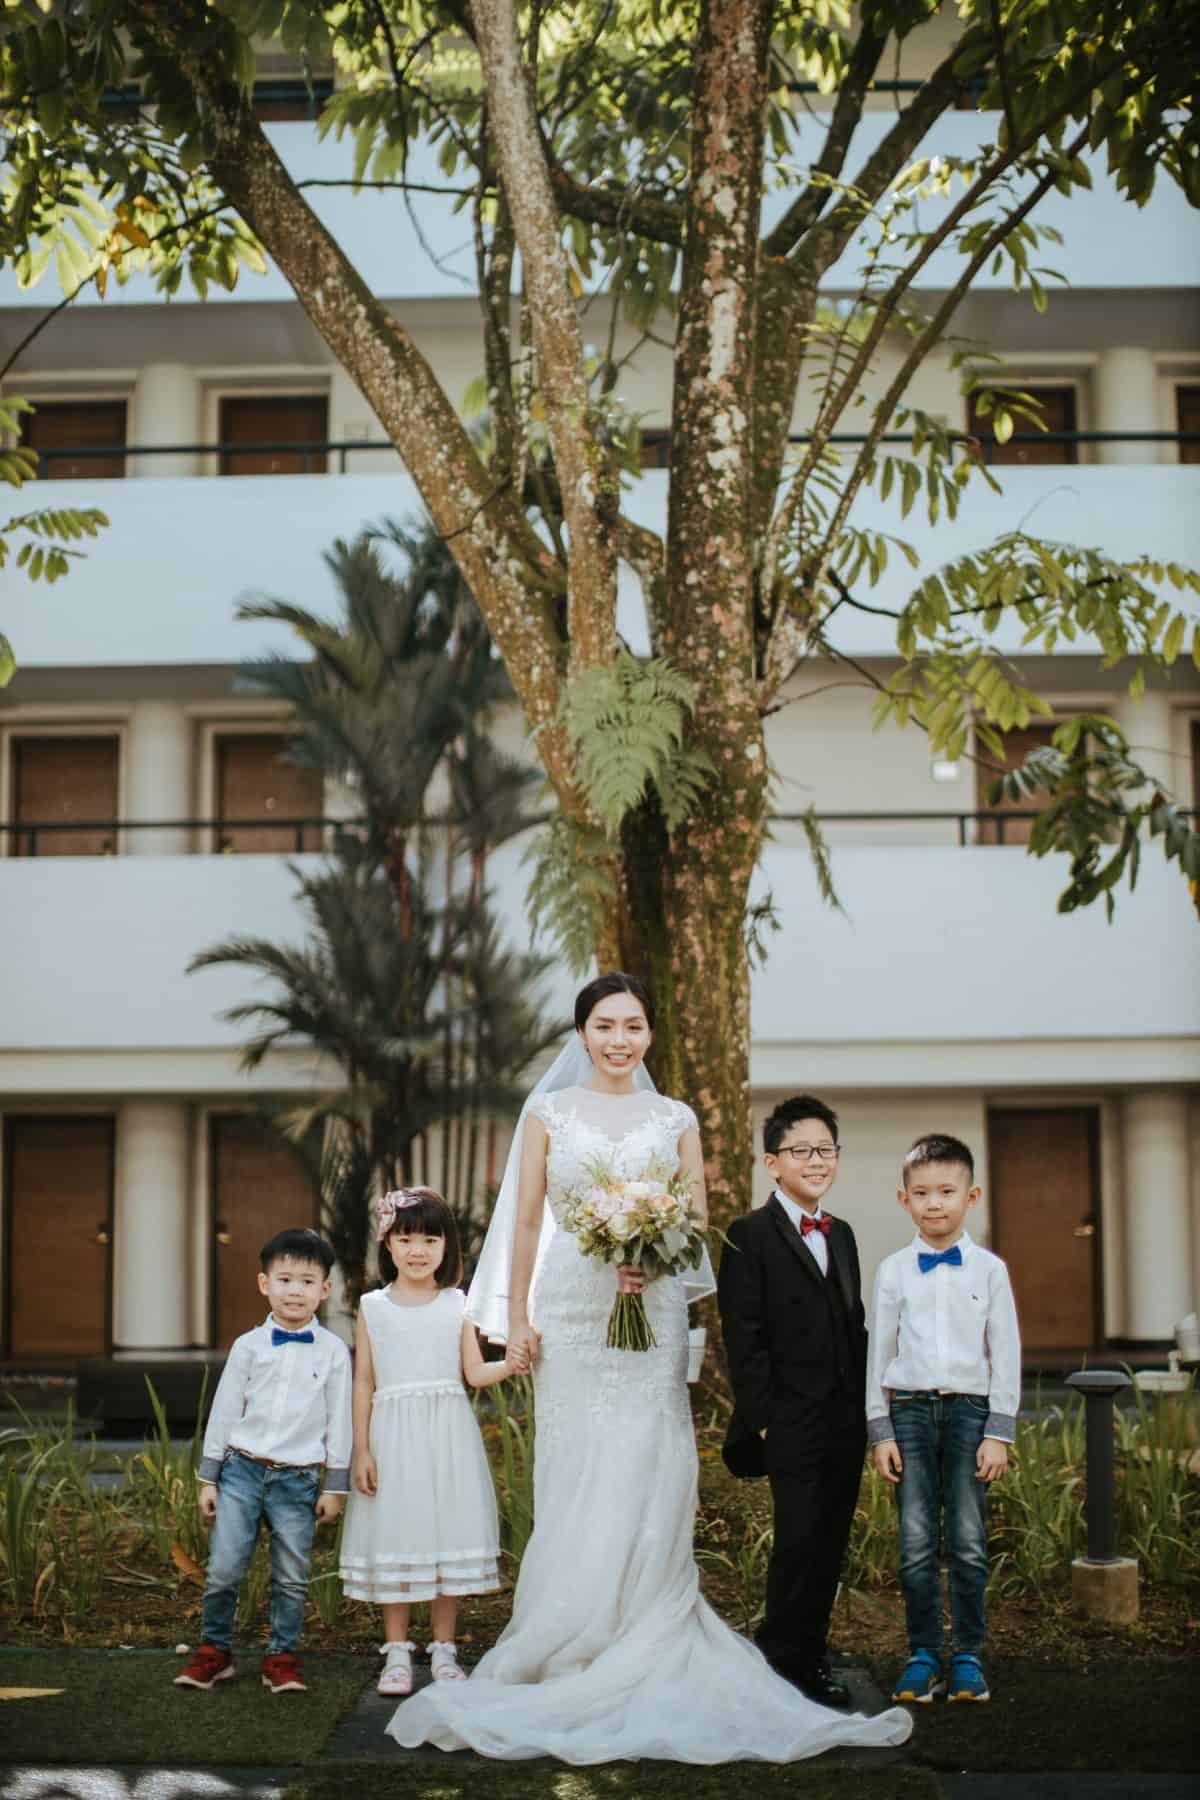 Garden Romantic Rustic Rosy Purple Golden Wedding at The Saujana Hotel Subang Kuala Lumpur malaysia cliff choong the cross effects kevin tan destination portrait and wedding photographer malaysia kuala lumpur bride and groom couple kiss romantic intimate moment scene Bridesmaids and bride